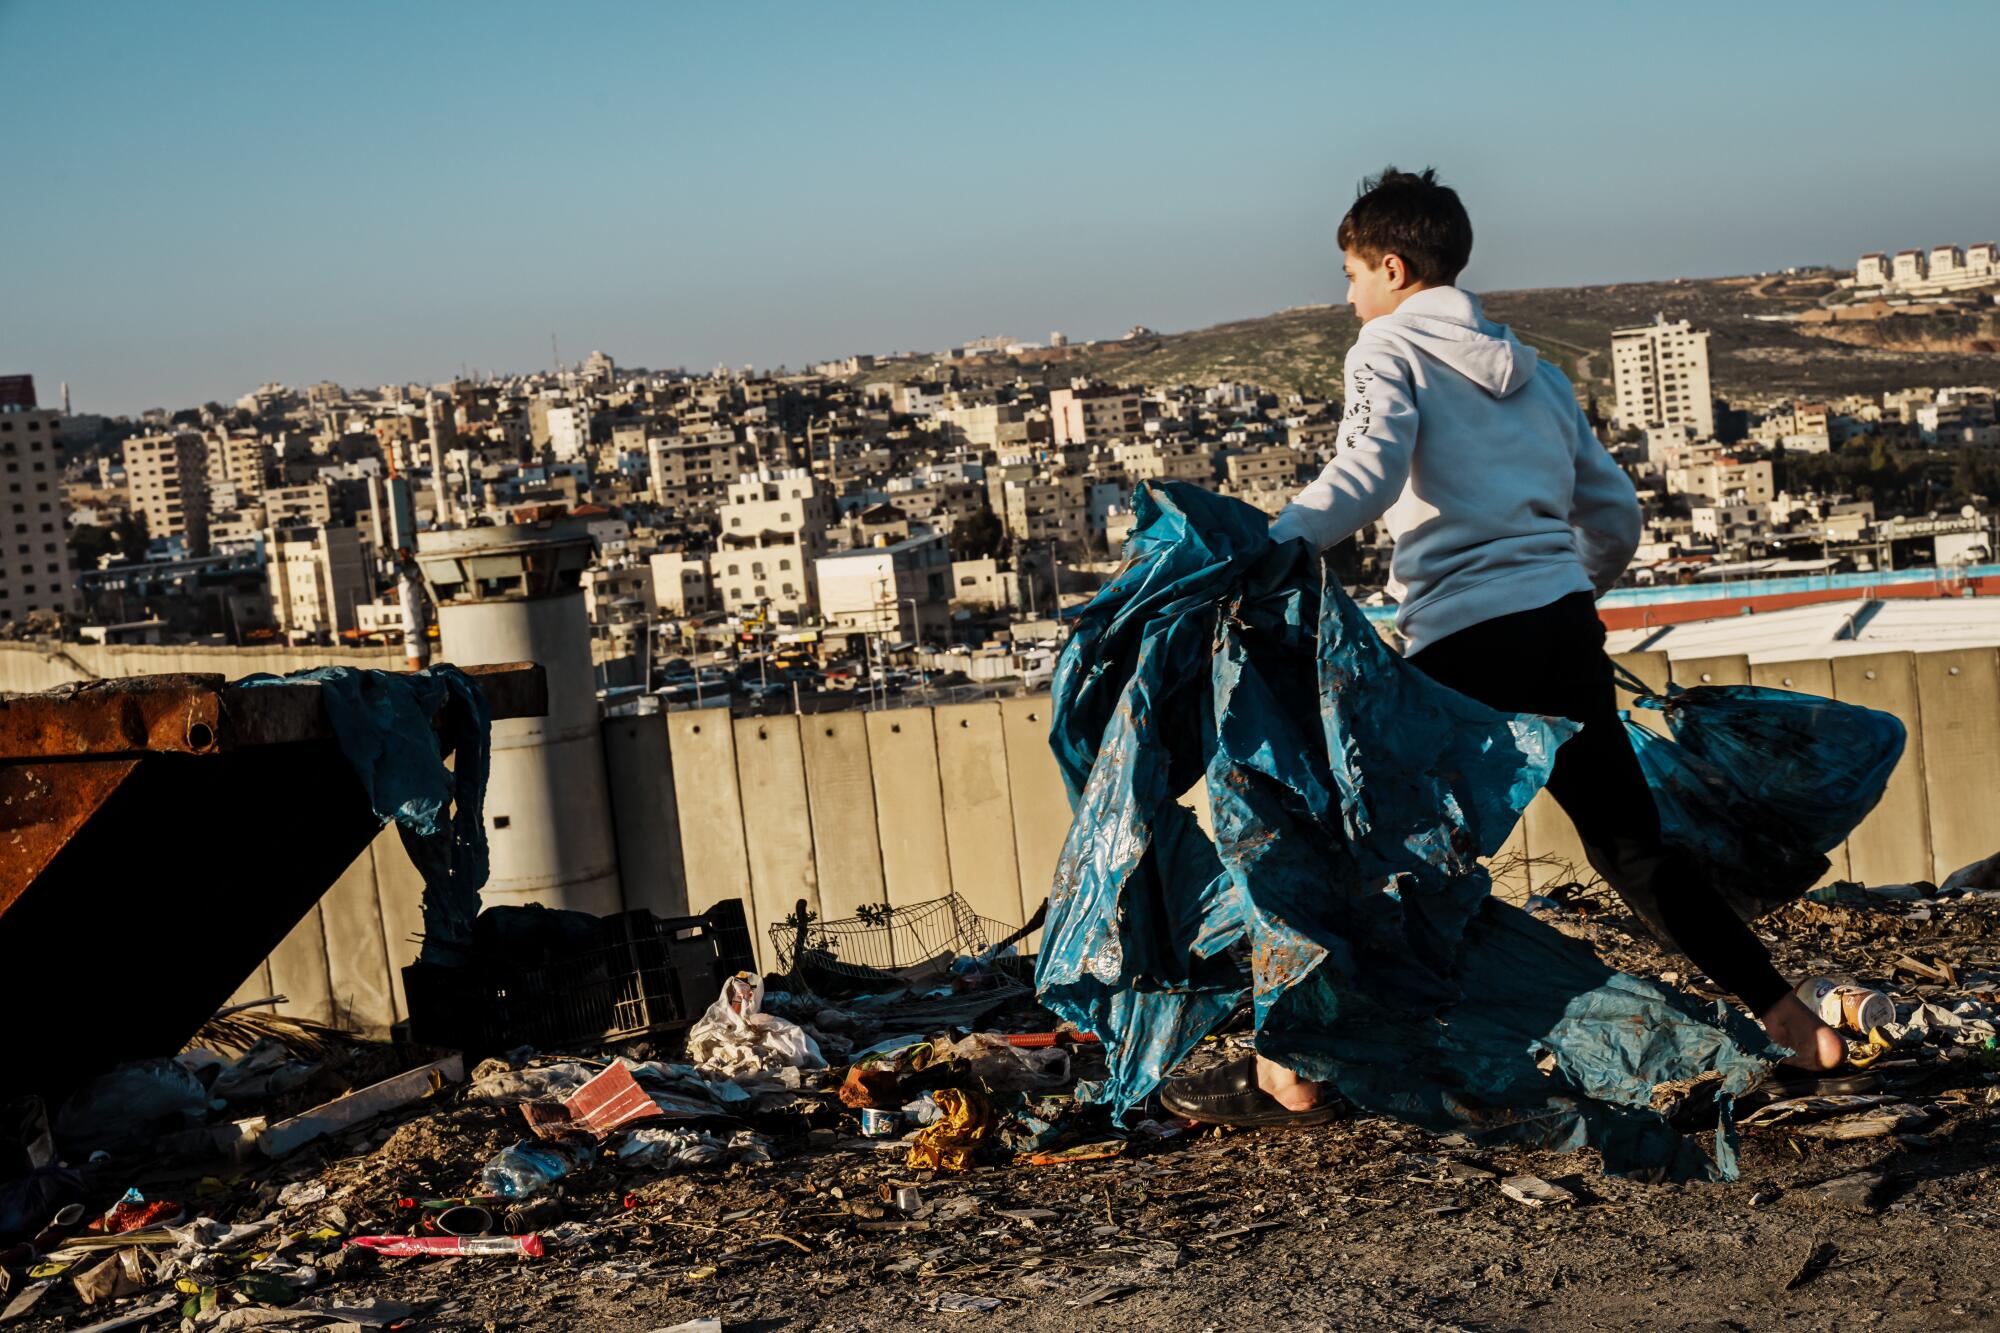 A boy takes out the trash to a bin on a hilltop overlooking the Qalandiya check point.